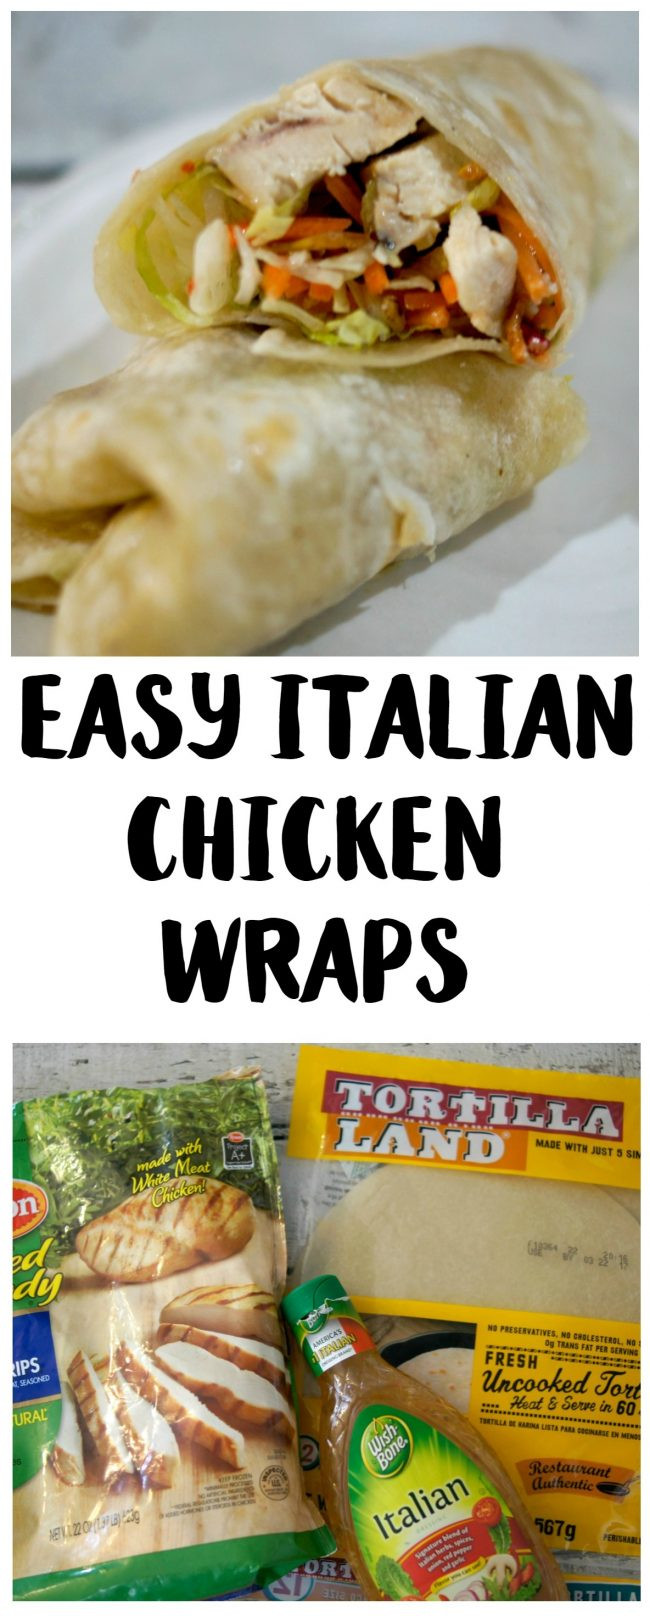 Easy Chicken Recipes For Dinner With Few Ingredients
 Quick and Easy Italian Chicken Wrap Recipe Not Quite